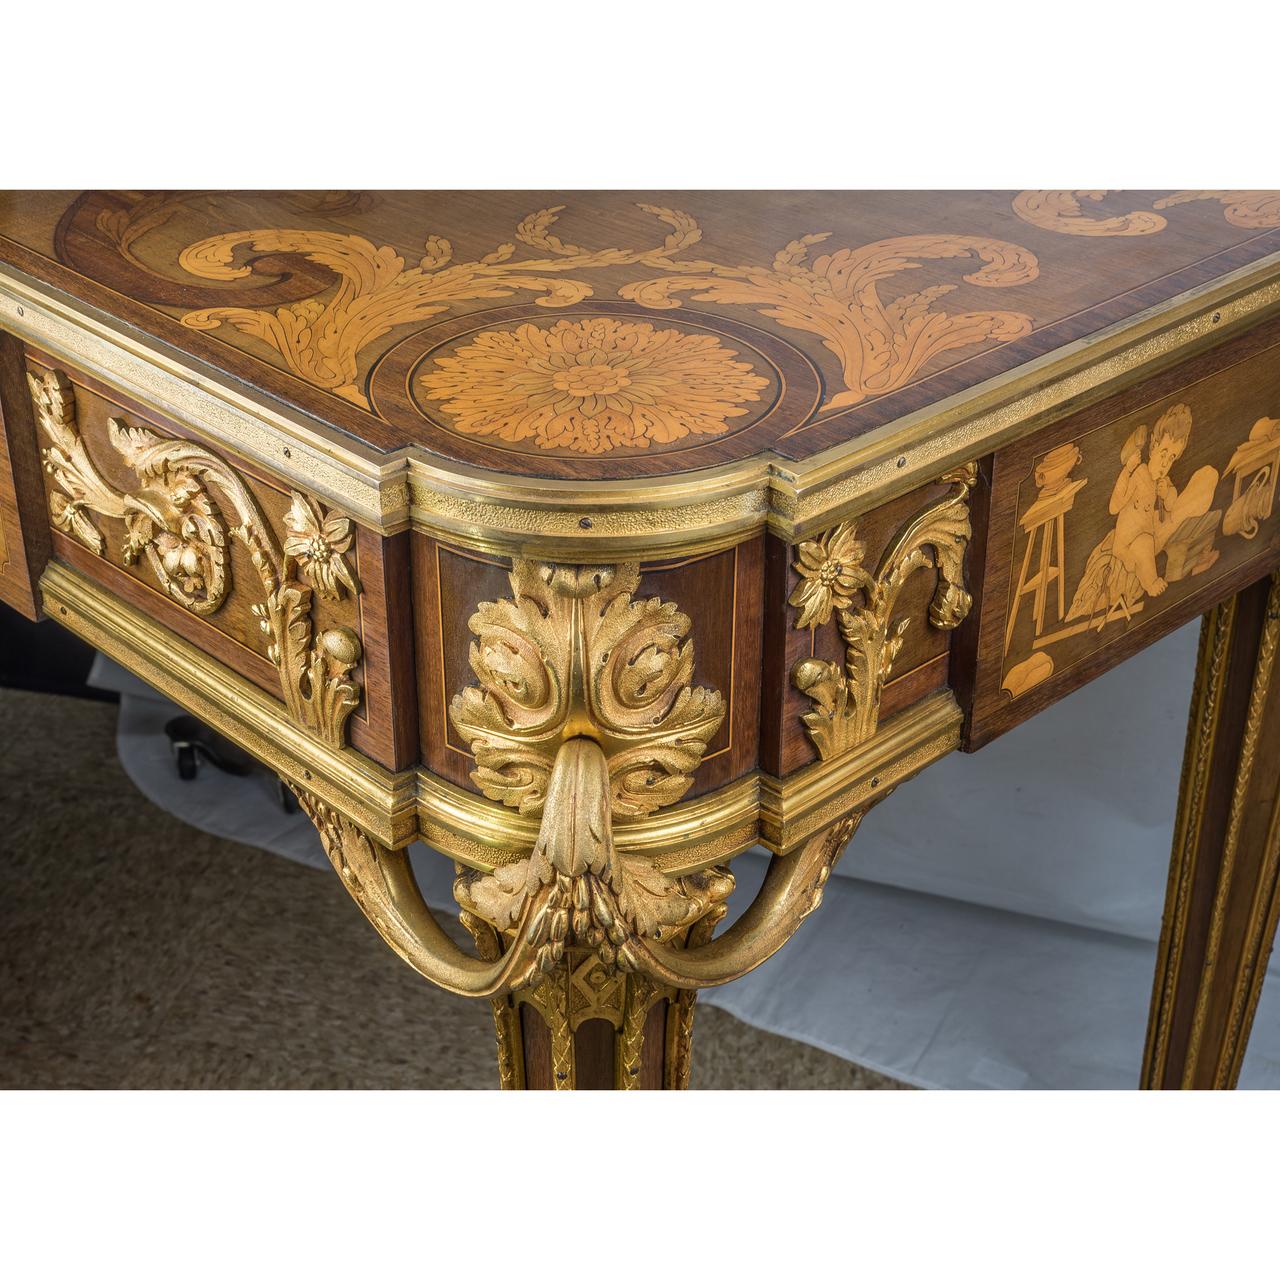 19th Century French Ormolu Mounted Marquetry Center Table by E. Khan & Cie. For Sale 8